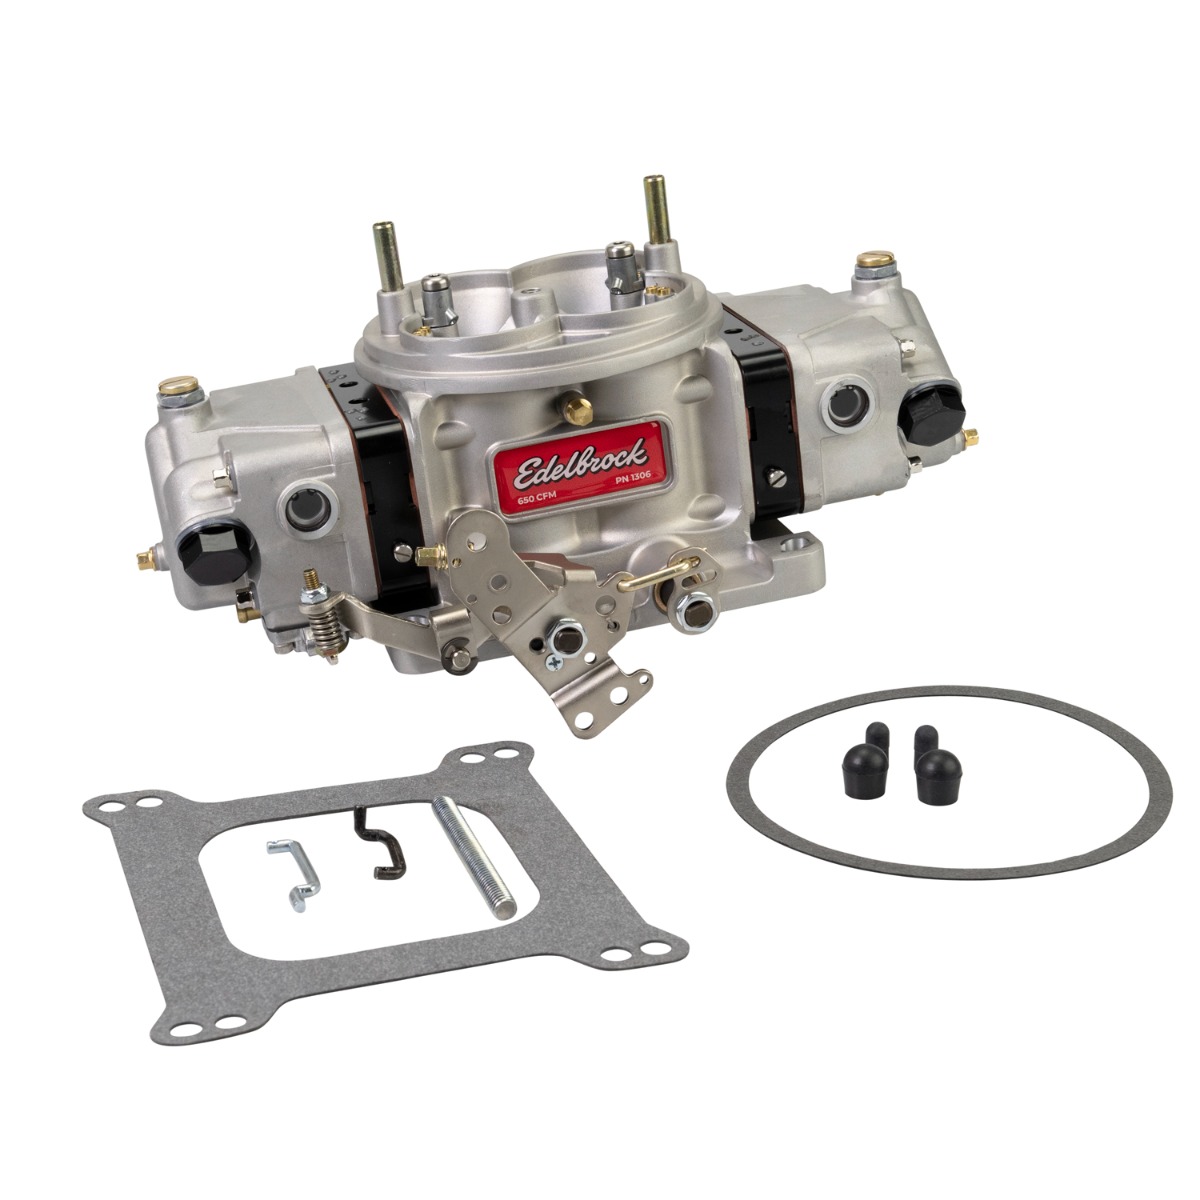 Our VRS-4150 650, 750, and 850 carburetors are IN STOCK!! Put your order in online today #edelbrock #edelbrockperformance Edelbrock A Reputation Forged in America #racing #builtinusa #performance #autoracing #gofast